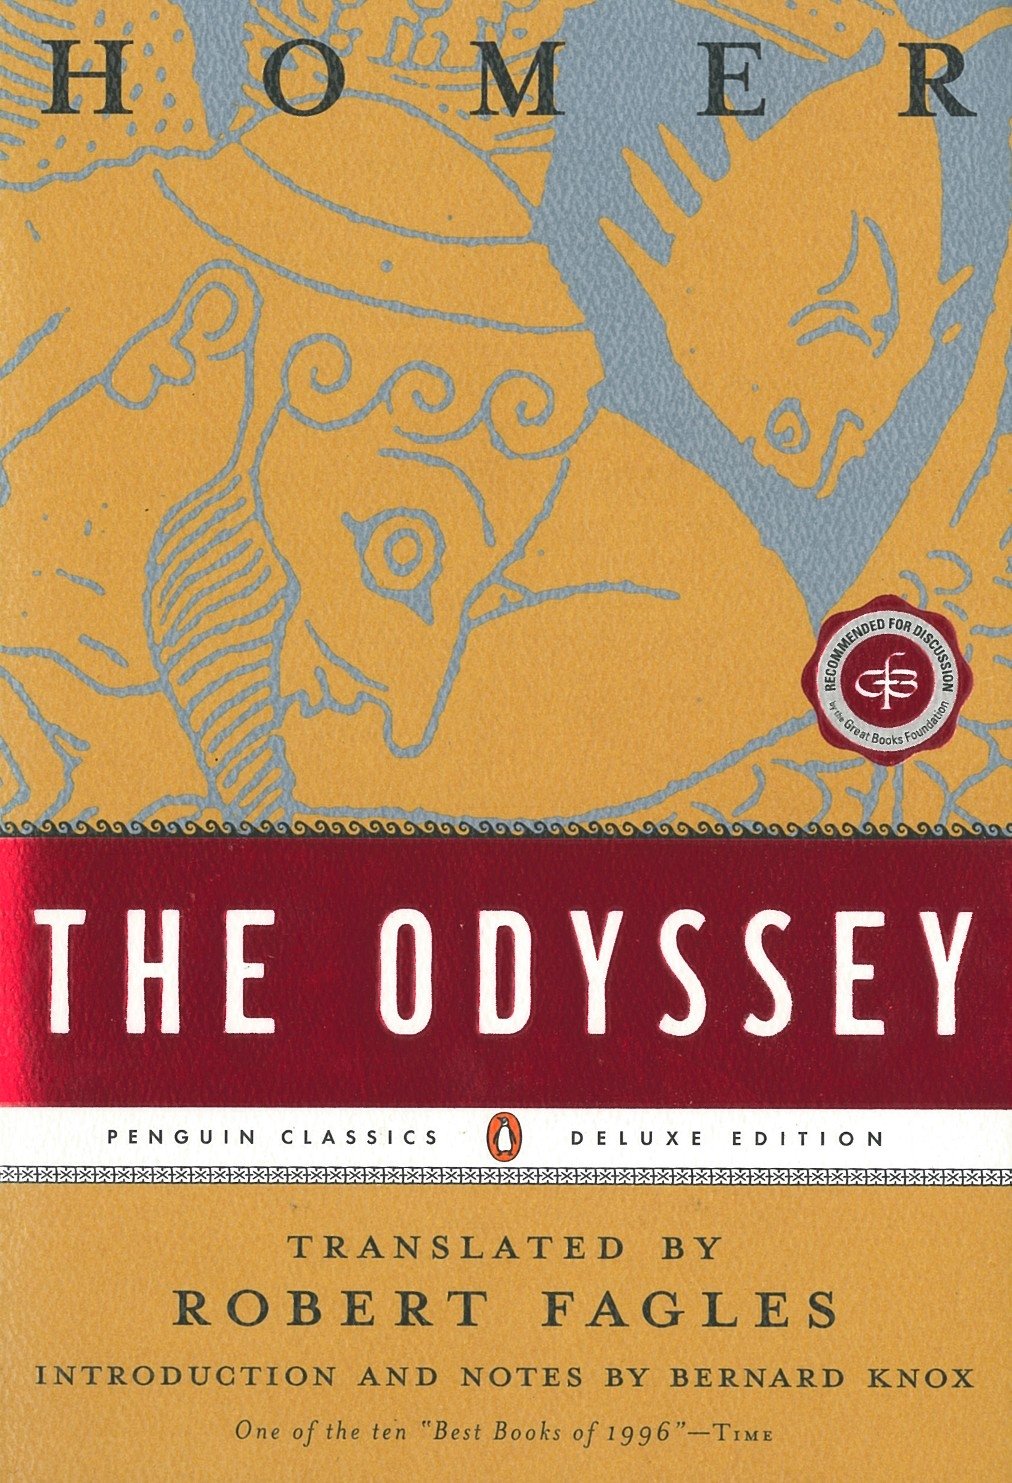 The Odyssey, translated by Robert Fagles